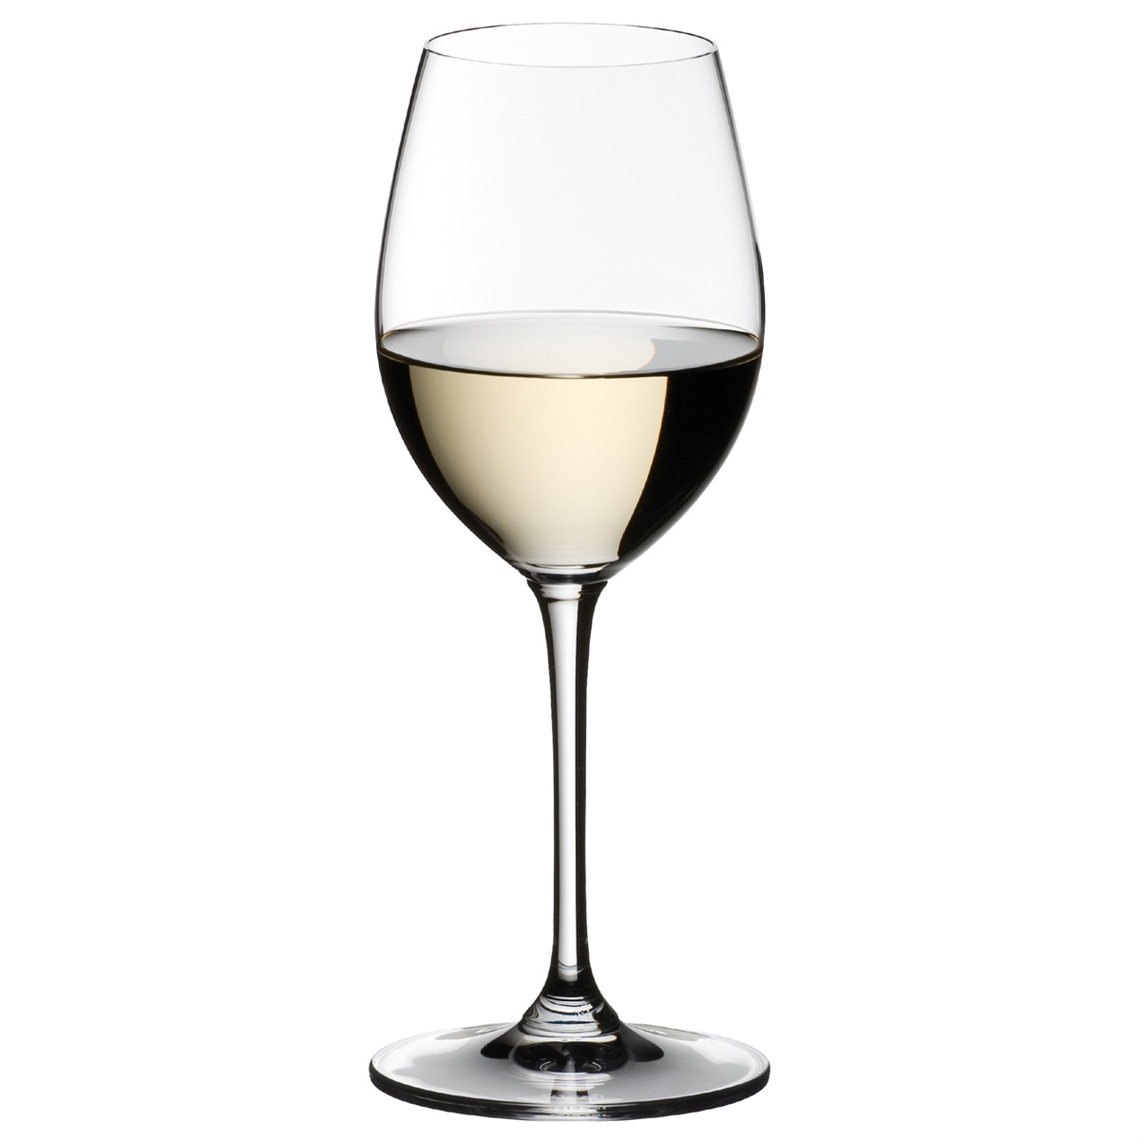 View more riedel sale from our Dessert Wine Glasses range